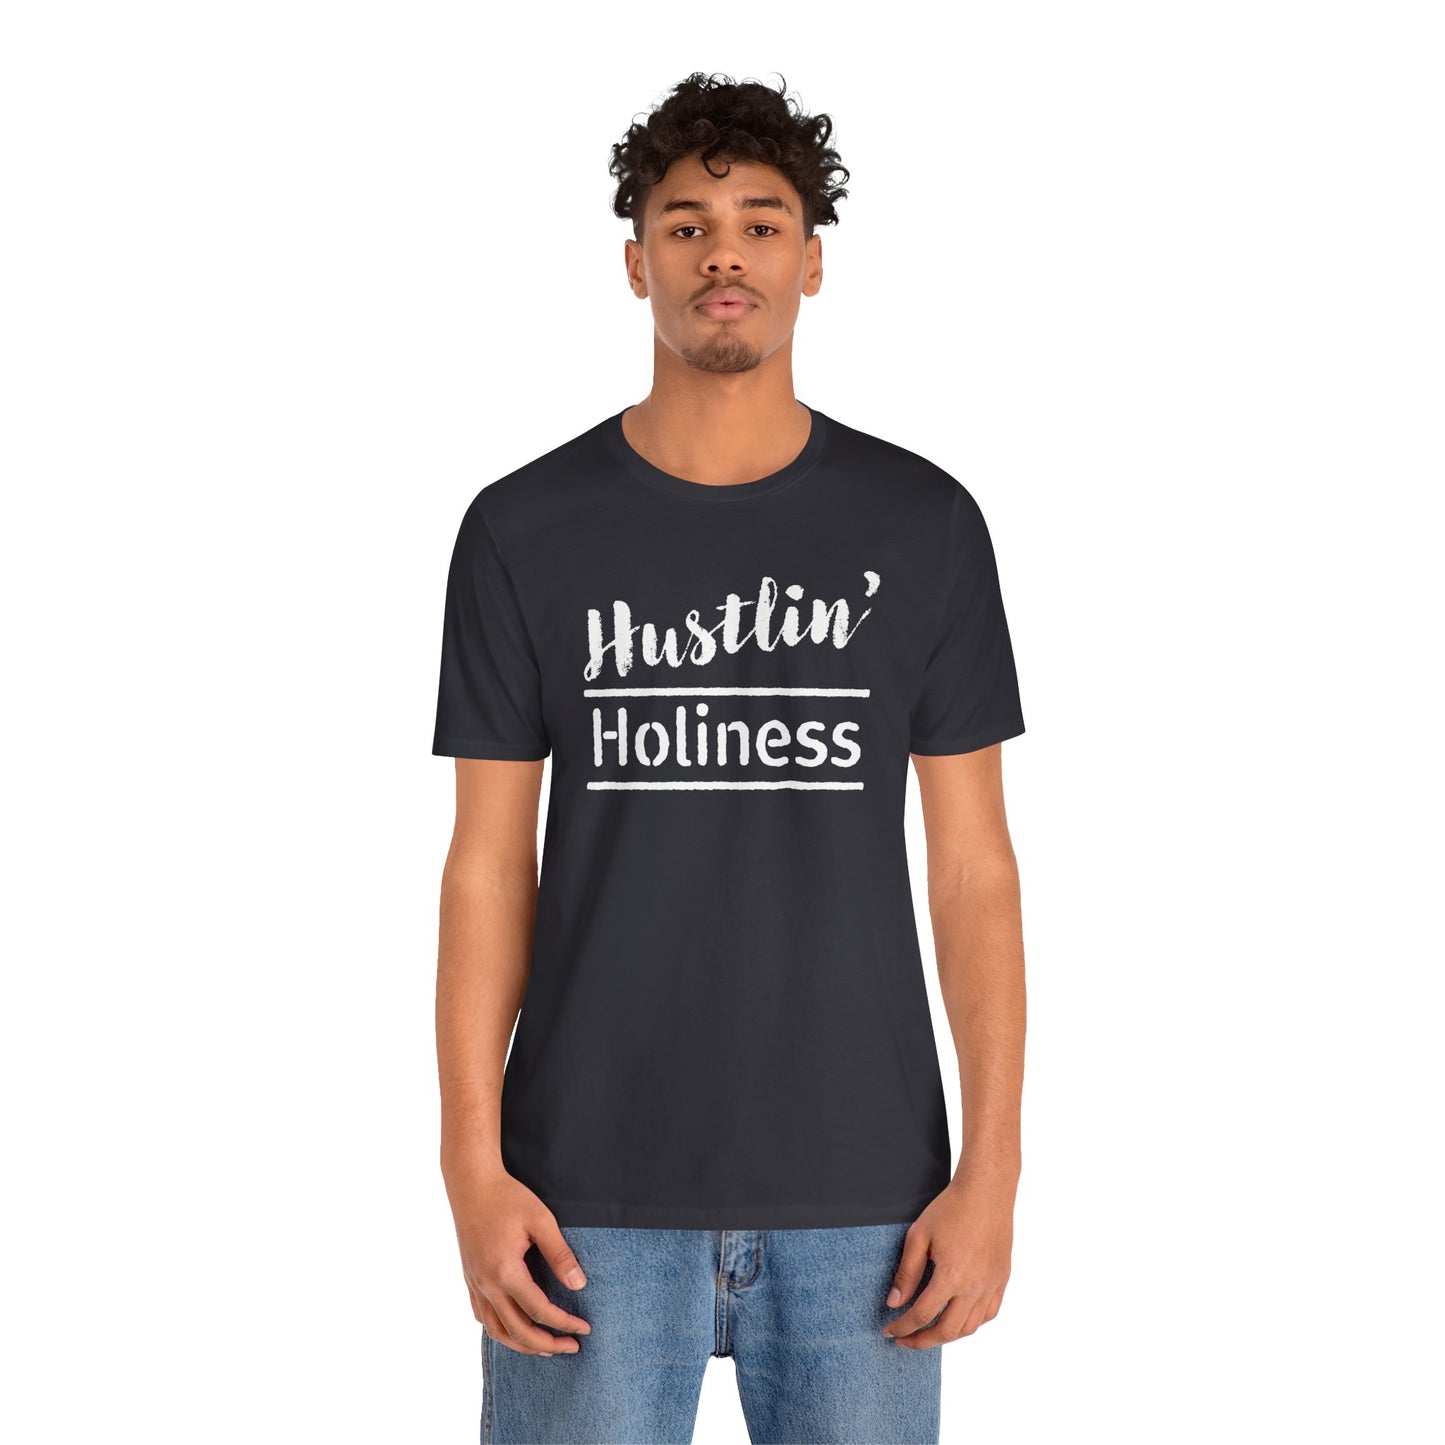 HUSTLING HOLINESS. Wearing & Sharing The Word. Live JESUS out loud. Tshirts. Christian. Jesus. Faith. Gifts. Church. Recovery. Addiction.